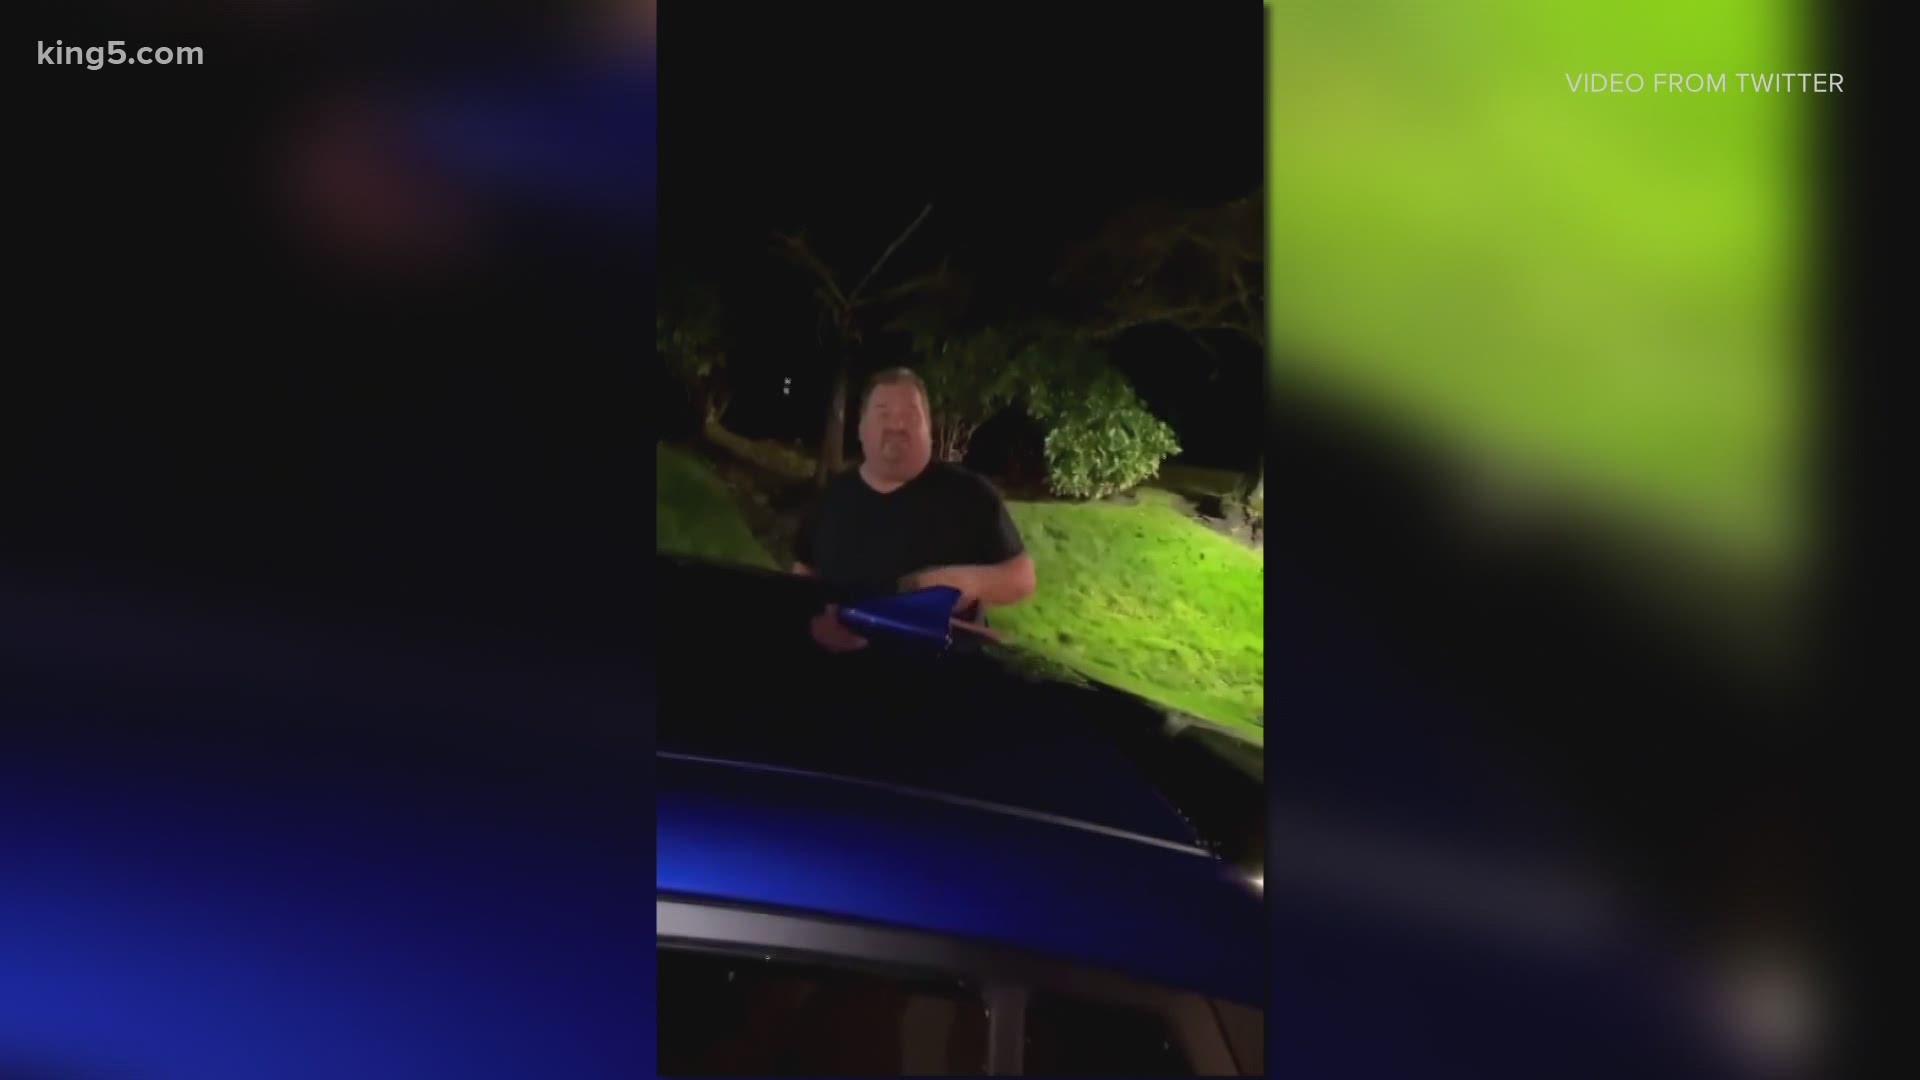 The man was also fired from his job. The city of Issaquah's mayor also reacted to the video, saying that "racism has no place in our community."